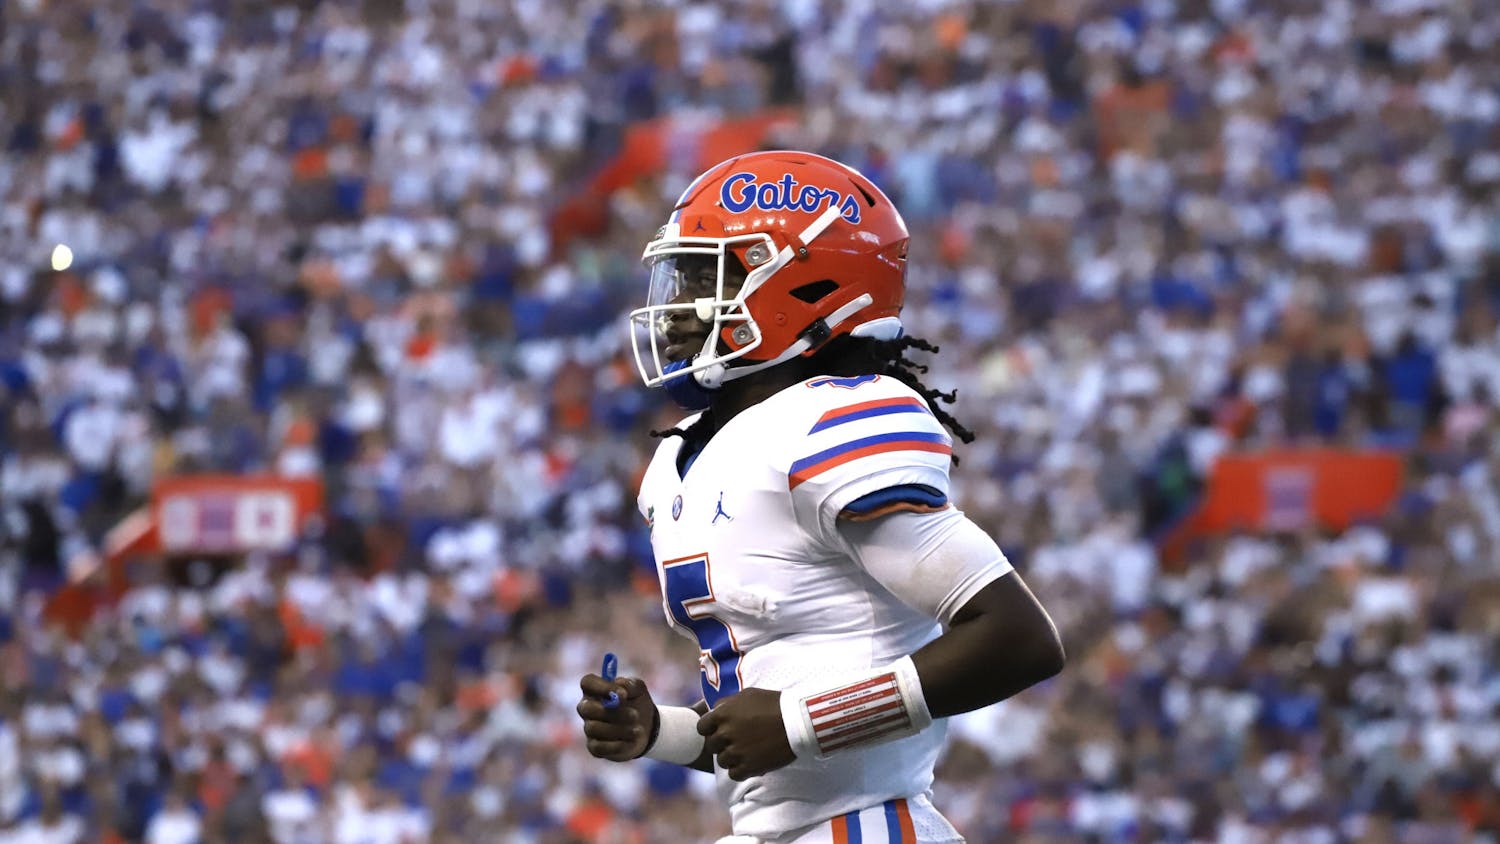 Florida's Emory Jones on the field during the Gators' season-opening 35-14 victory over Florida Atlantic on Sept. 4.